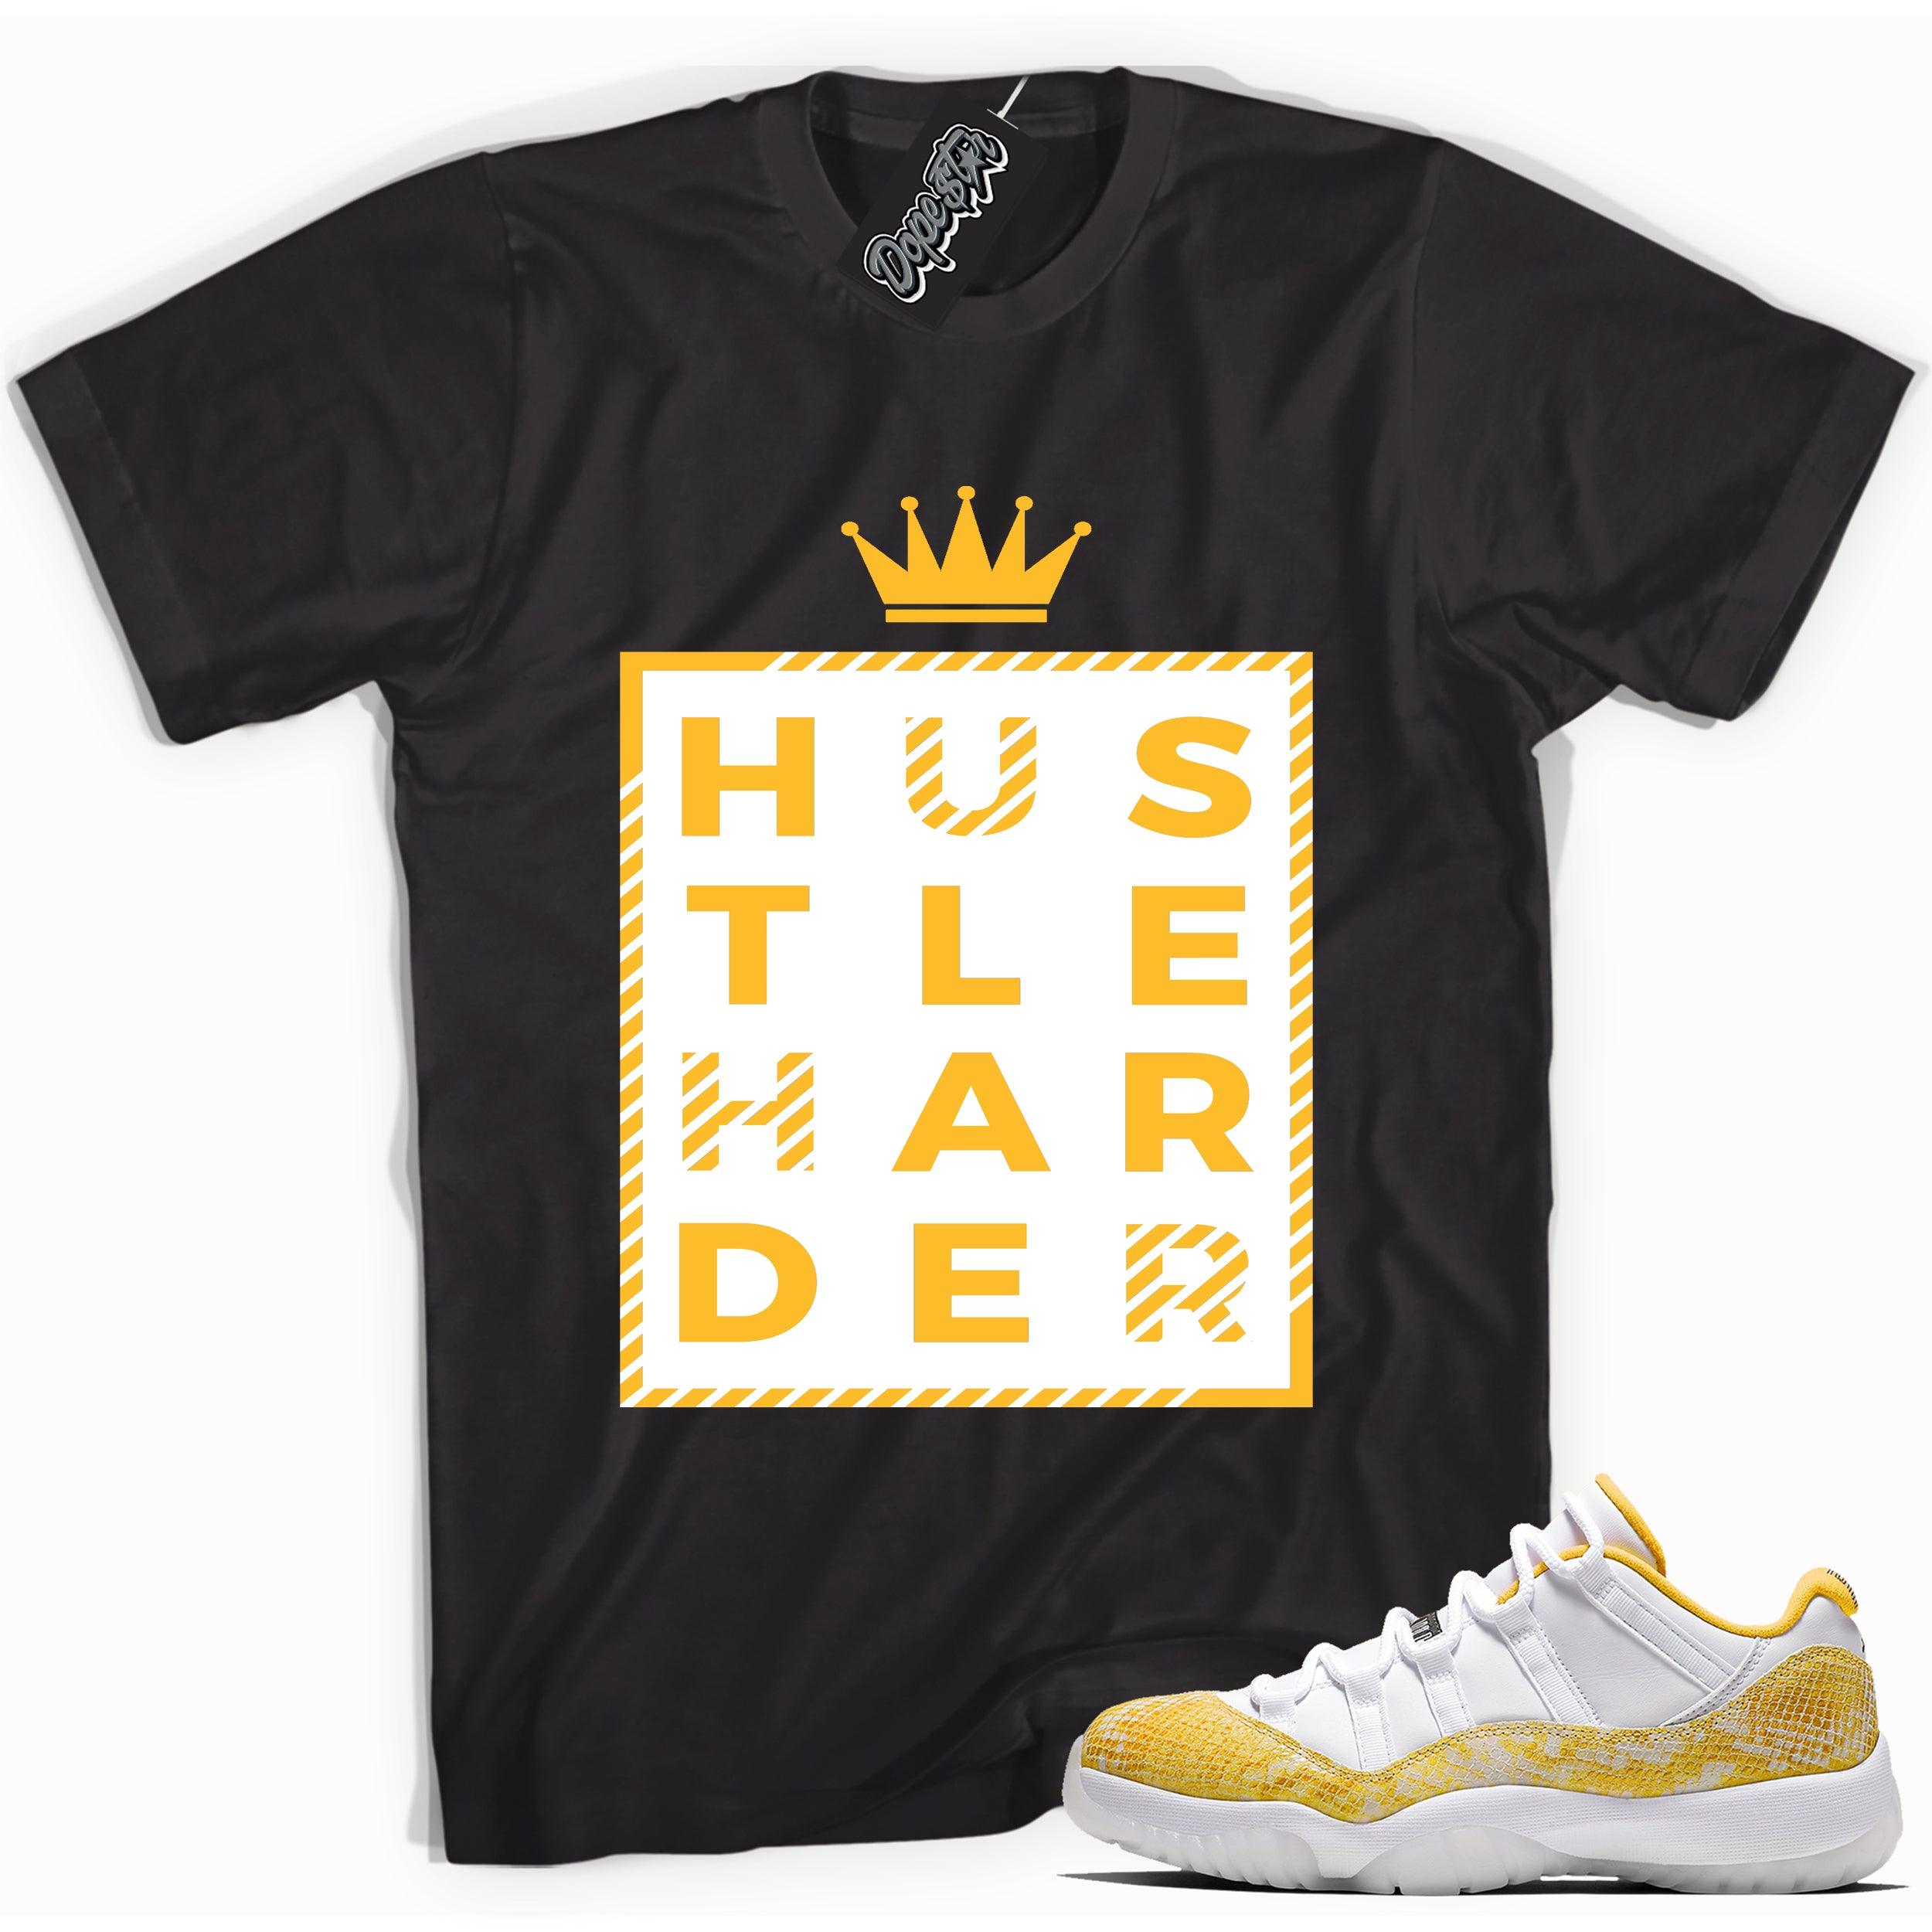 Cool black graphic tee with 'hustle harder' print, that perfectly matches  Air Jordan 11 Low Yellow Snakeskin sneakers